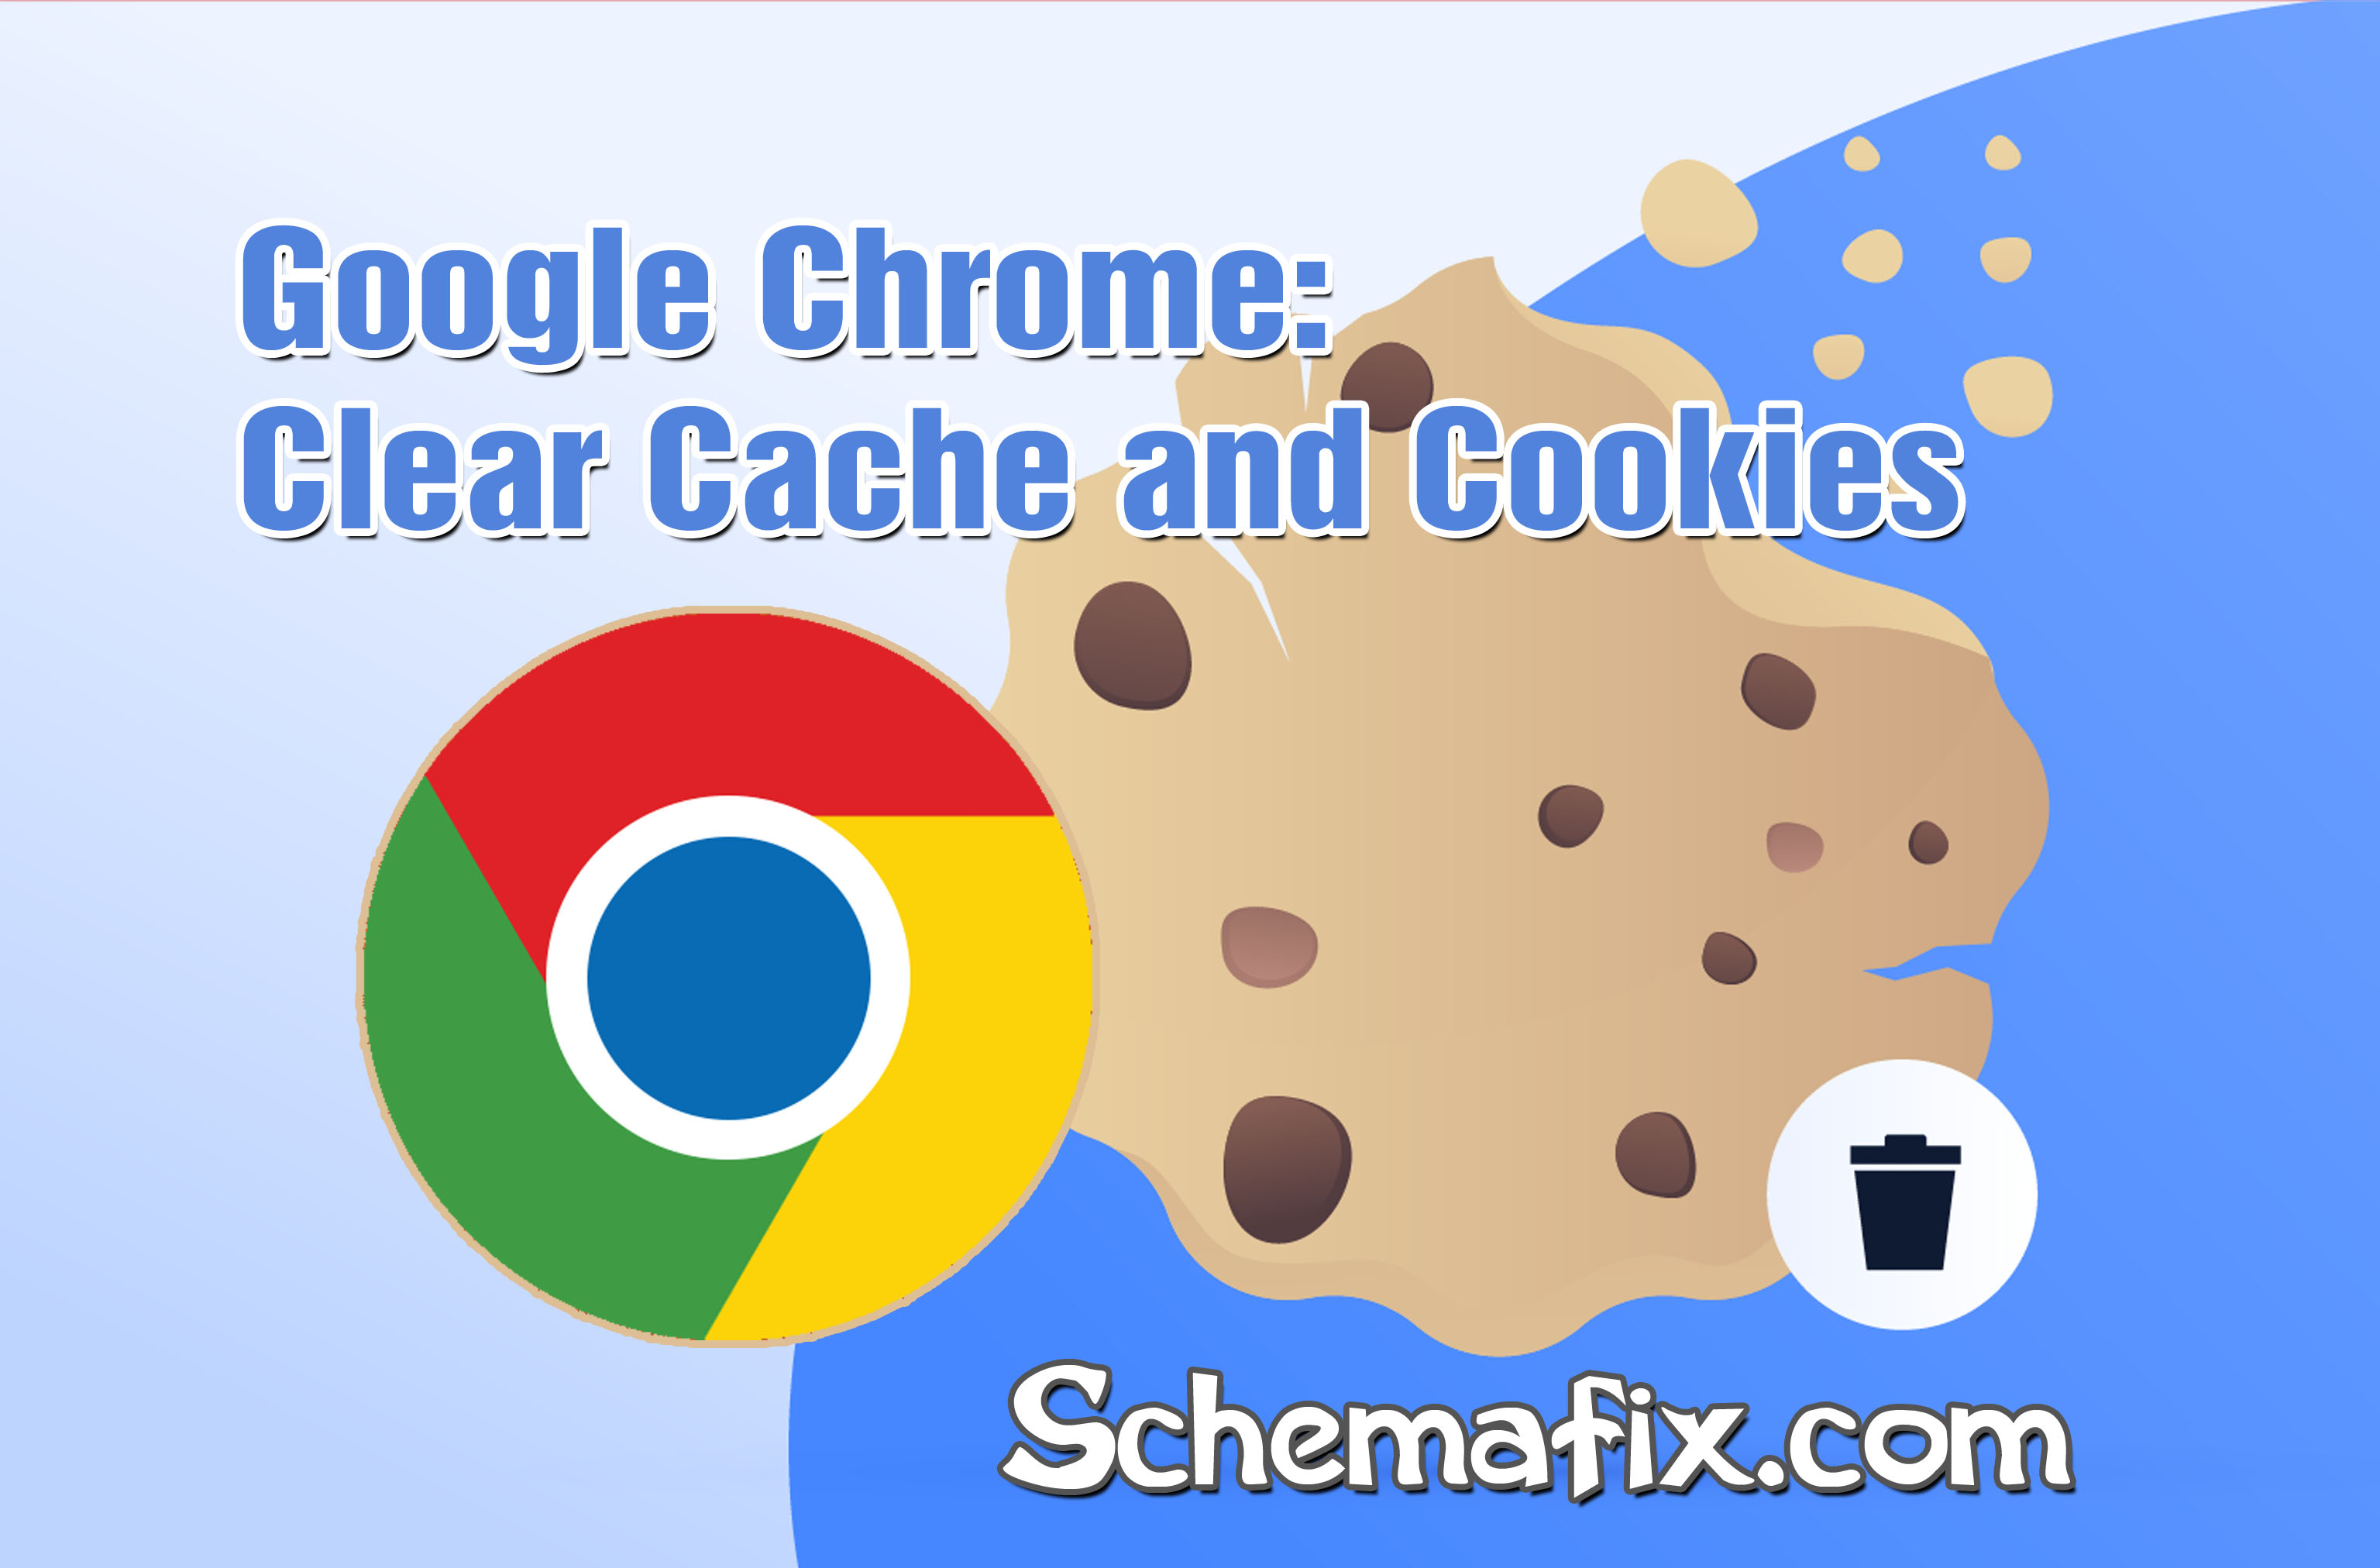 Chrome - Clear Cache and Cookies